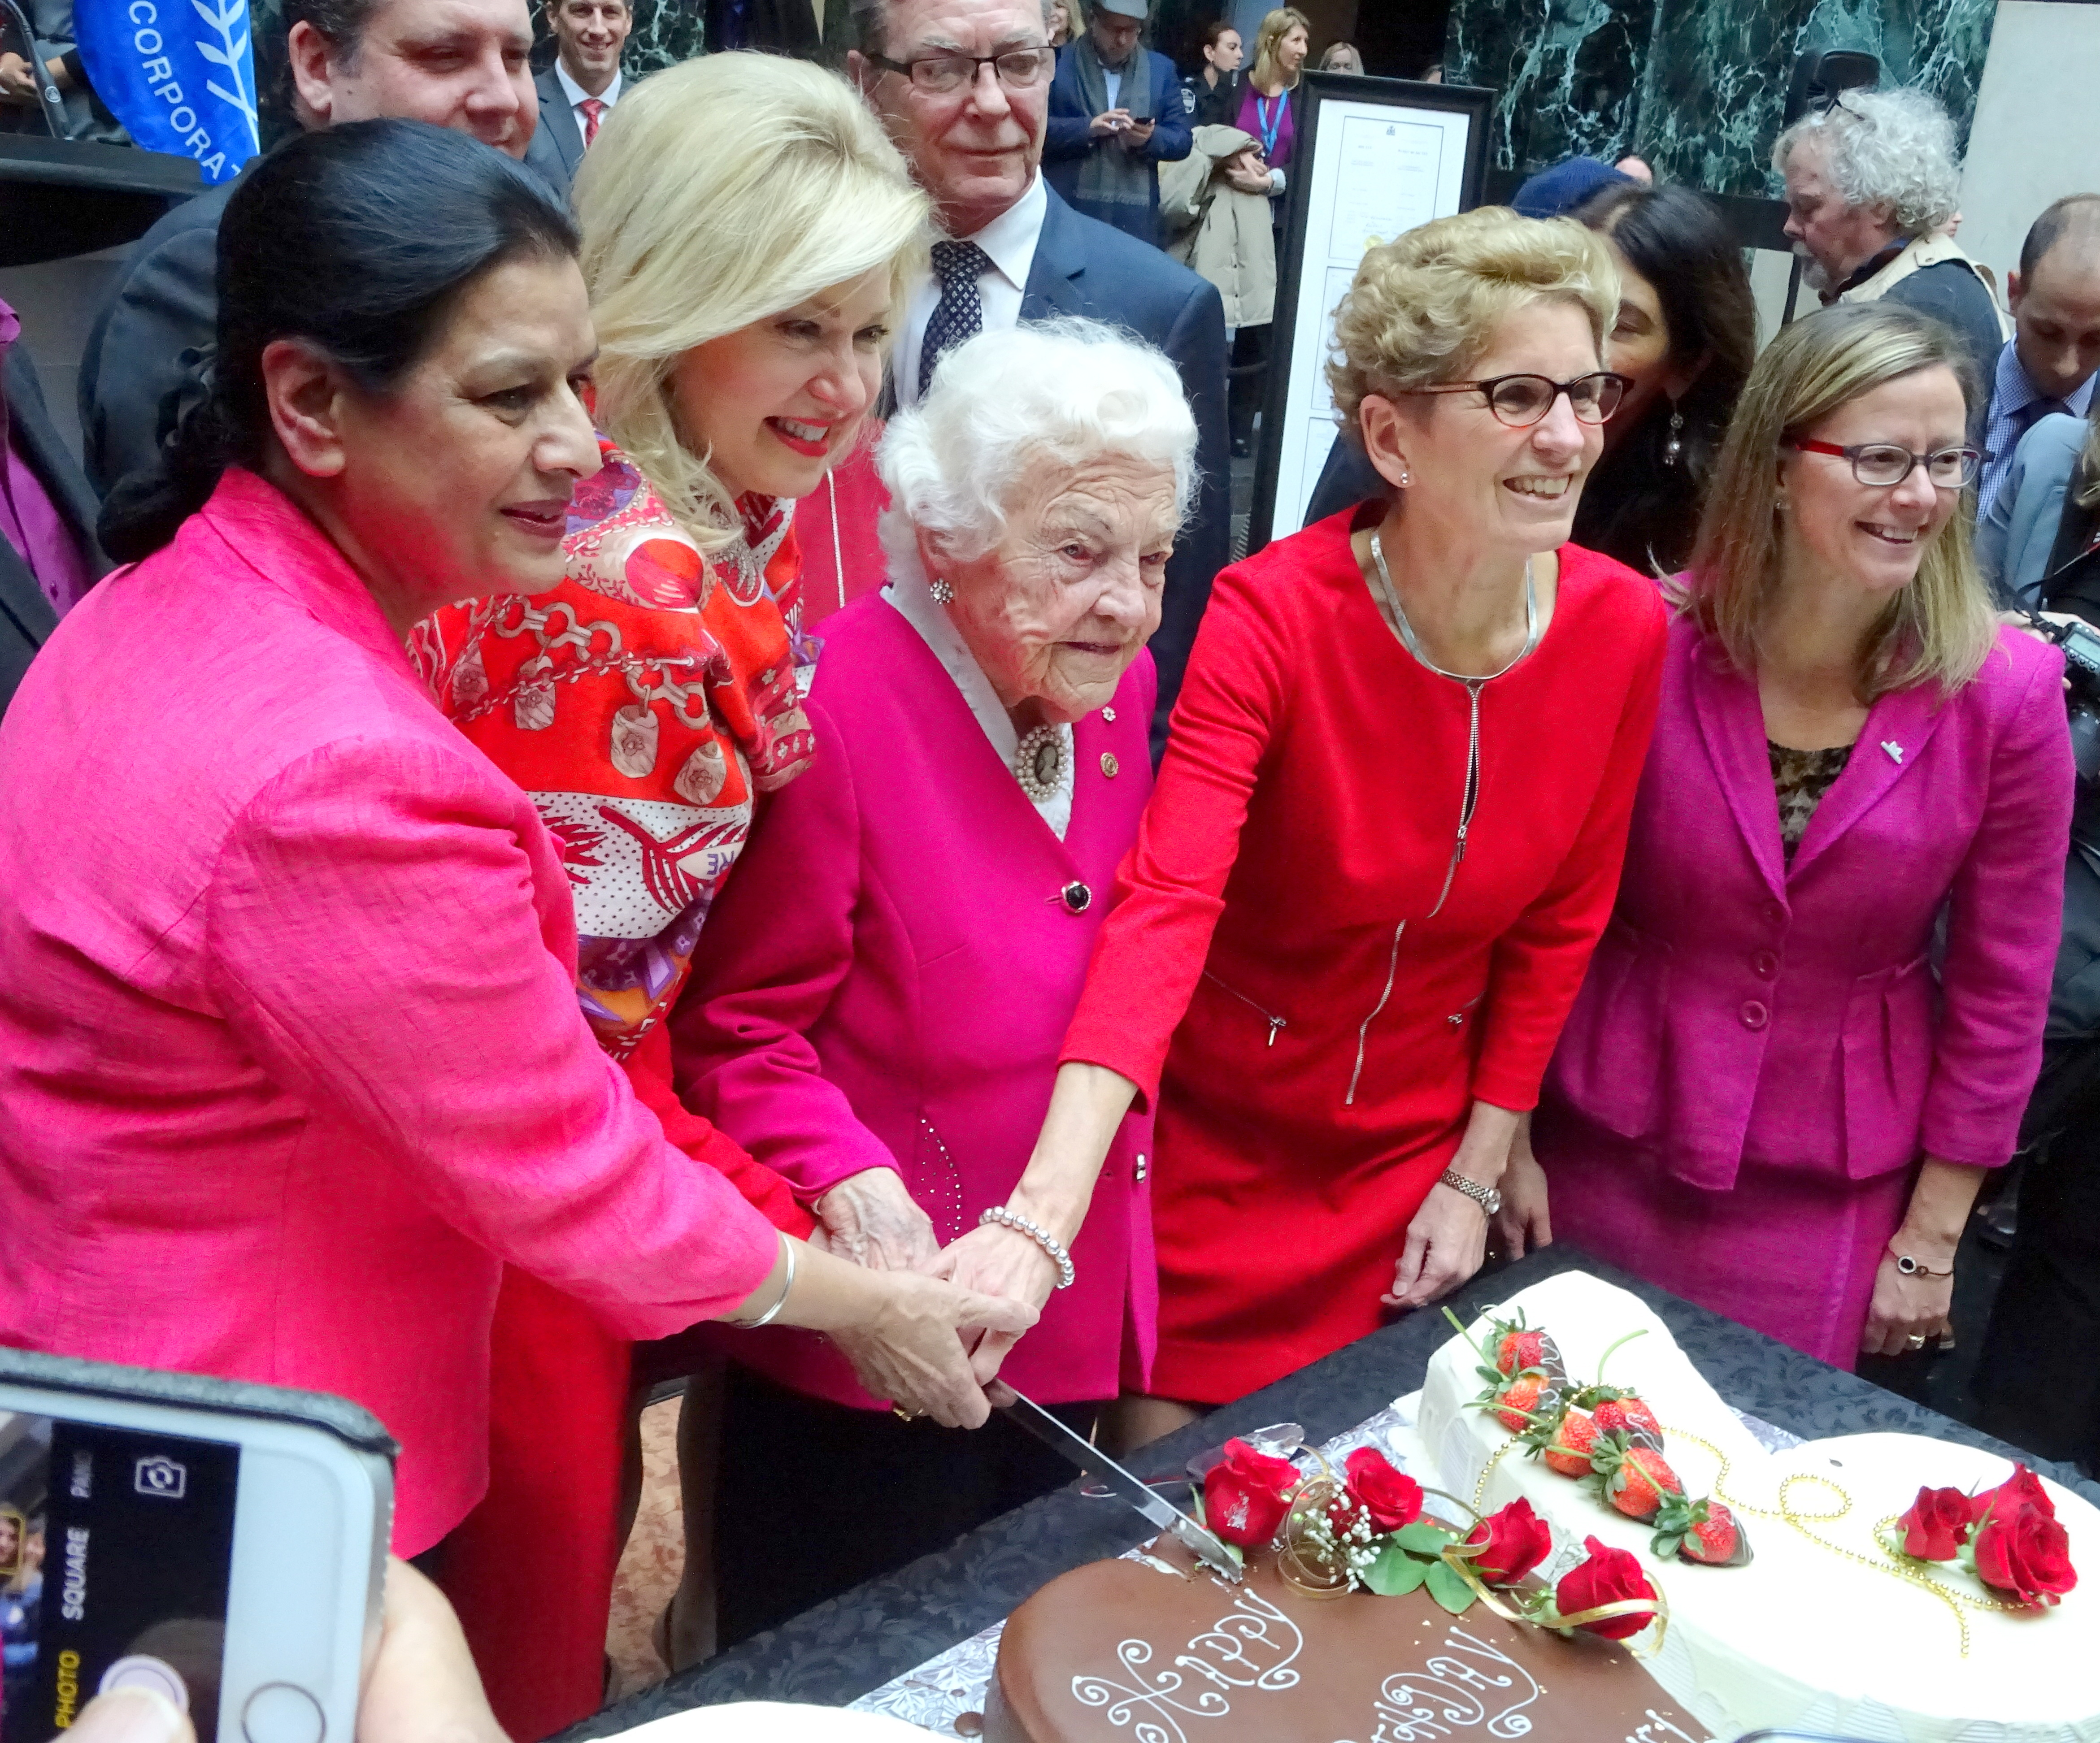 MPP Amrit Mangat, Mayor Bonnie Crombie, and Ontario Premier Kathleen Wynne help Hazel McCallion cut her 96th Birthday Cake, with Ward 3 Councillor Chris Fonseca, Mississauga Civic Centre, 14Feb17